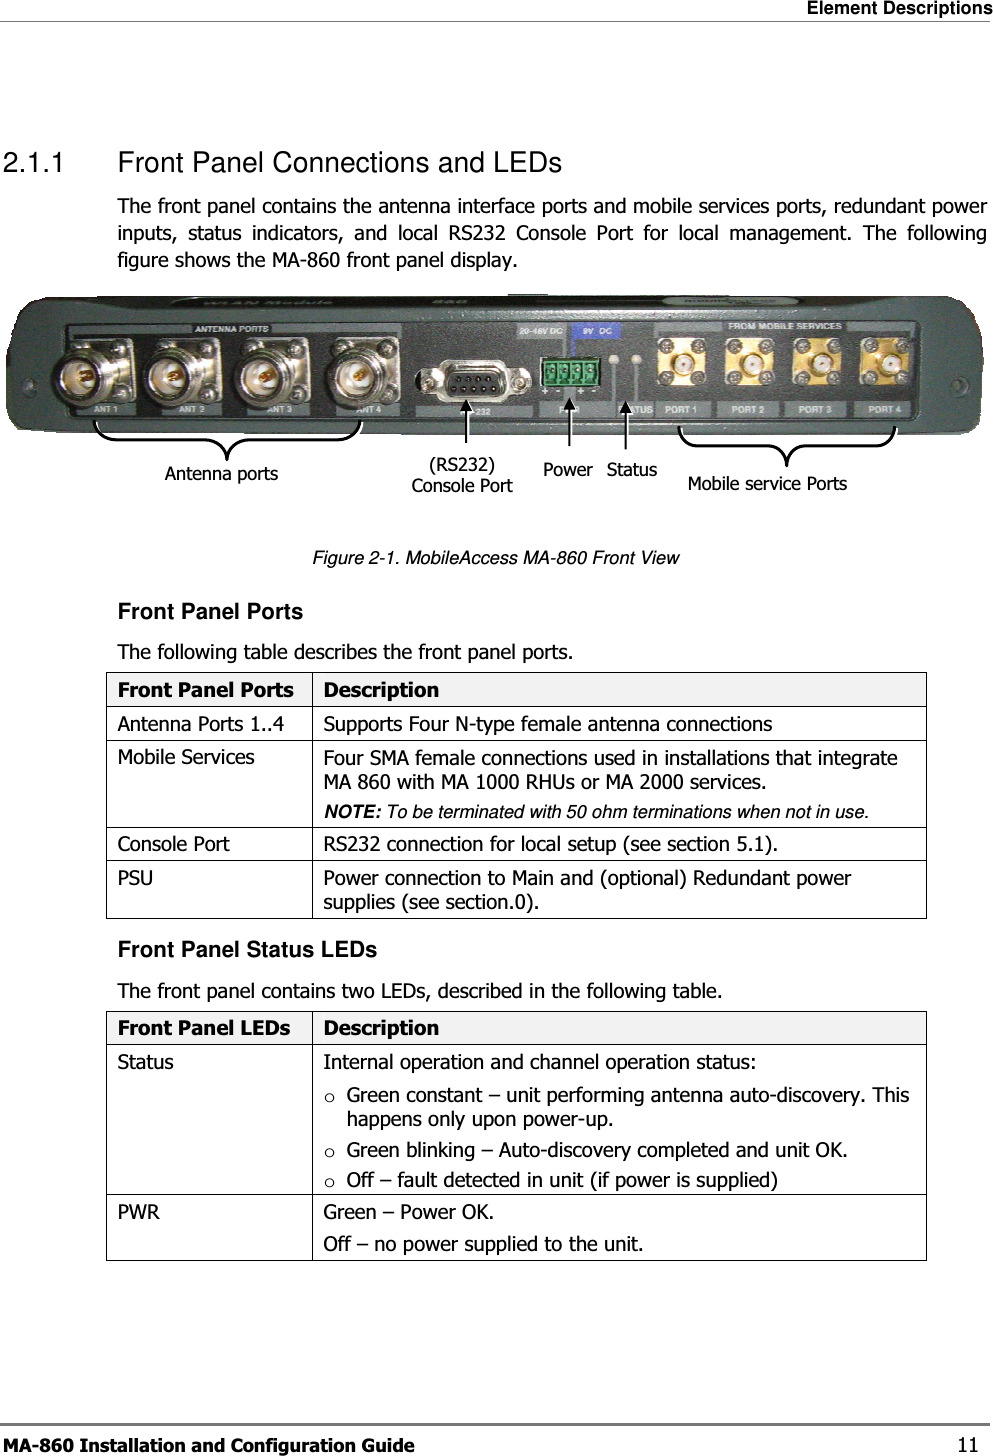 Element Descriptions MA-860 Installation and Configuration Guide    11  2.1.1  Front Panel Connections and LEDs The front panel contains the antenna interface ports and mobile services ports, redundant power inputs, status indicators, and local RS232 Console Port for local management. The following figure shows the MA-860 front panel display.   Figure  2-1. MobileAccess MA-860 Front View Front Panel Ports The following table describes the front panel ports. Front Panel Ports  Description Antenna Ports 1..4   Supports Four N-type female antenna connections Mobile Services  Four SMA female connections used in installations that integrate MA 860 with MA 1000 RHUs or MA 2000 services.  NOTE: To be terminated with 50 ohm terminations when not in use. Console Port  RS232 connection for local setup (see section  5.1).  PSU  Power connection to Main and (optional) Redundant power supplies (see section. 0). Front Panel Status LEDs The front panel contains two LEDs, described in the following table.  Front Panel LEDs  Description Status  Internal operation and channel operation status: oGreen constant – unit performing antenna auto-discovery. This happens only upon power-up. oGreen blinking – Auto-discovery completed and unit OK. oOff – fault detected in unit (if power is supplied) PWR  Green – Power OK.  Off – no power supplied to the unit. Mobile service PortsPower(RS232) Console Port Antenna ports  Status